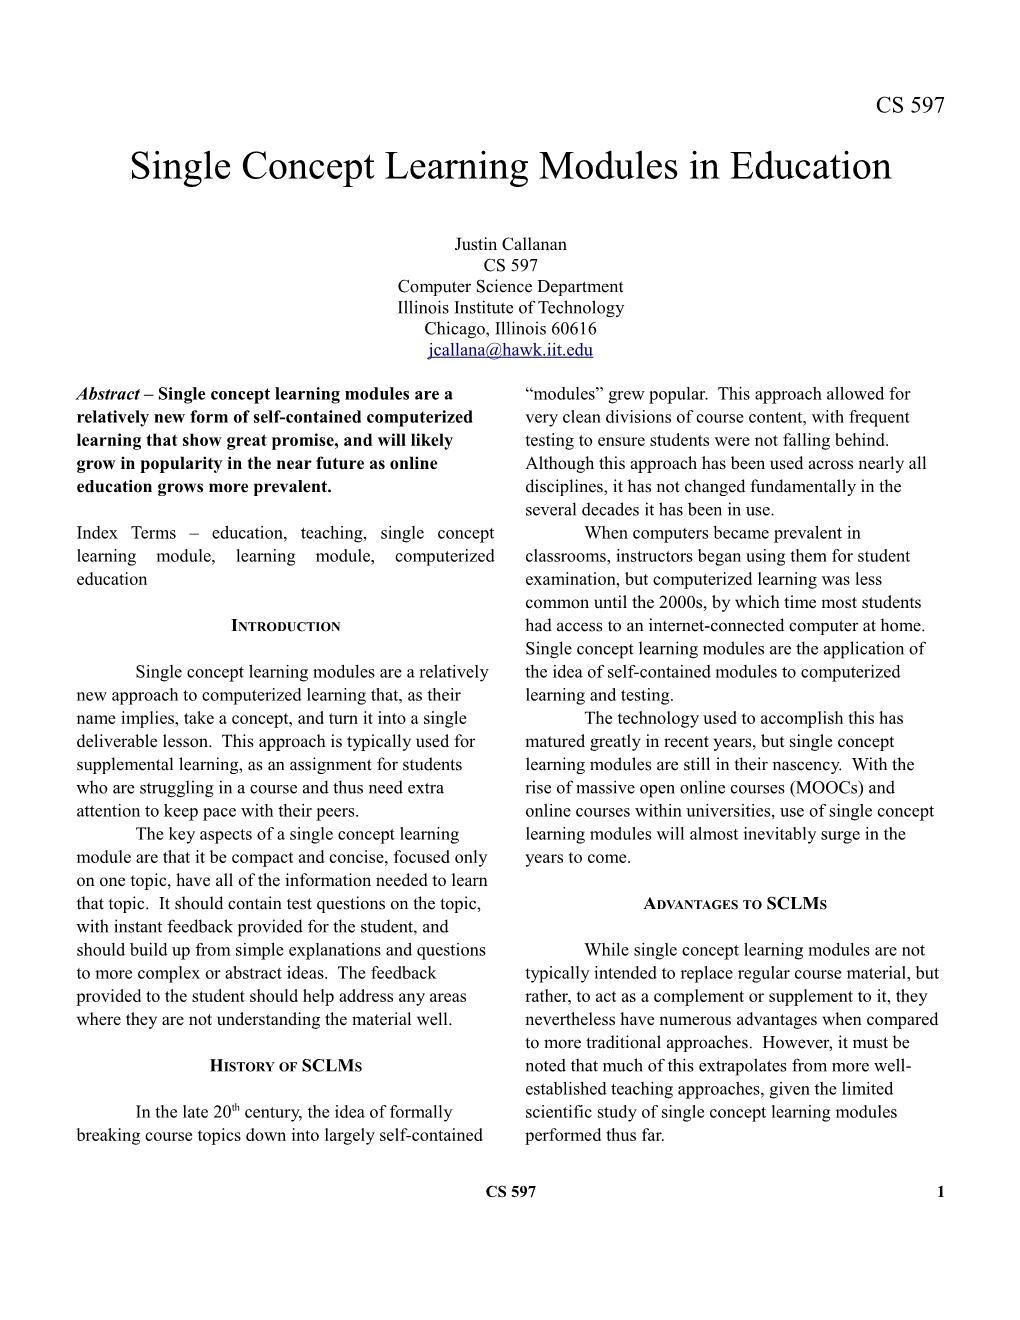 Single Concept Learning Modules in Education